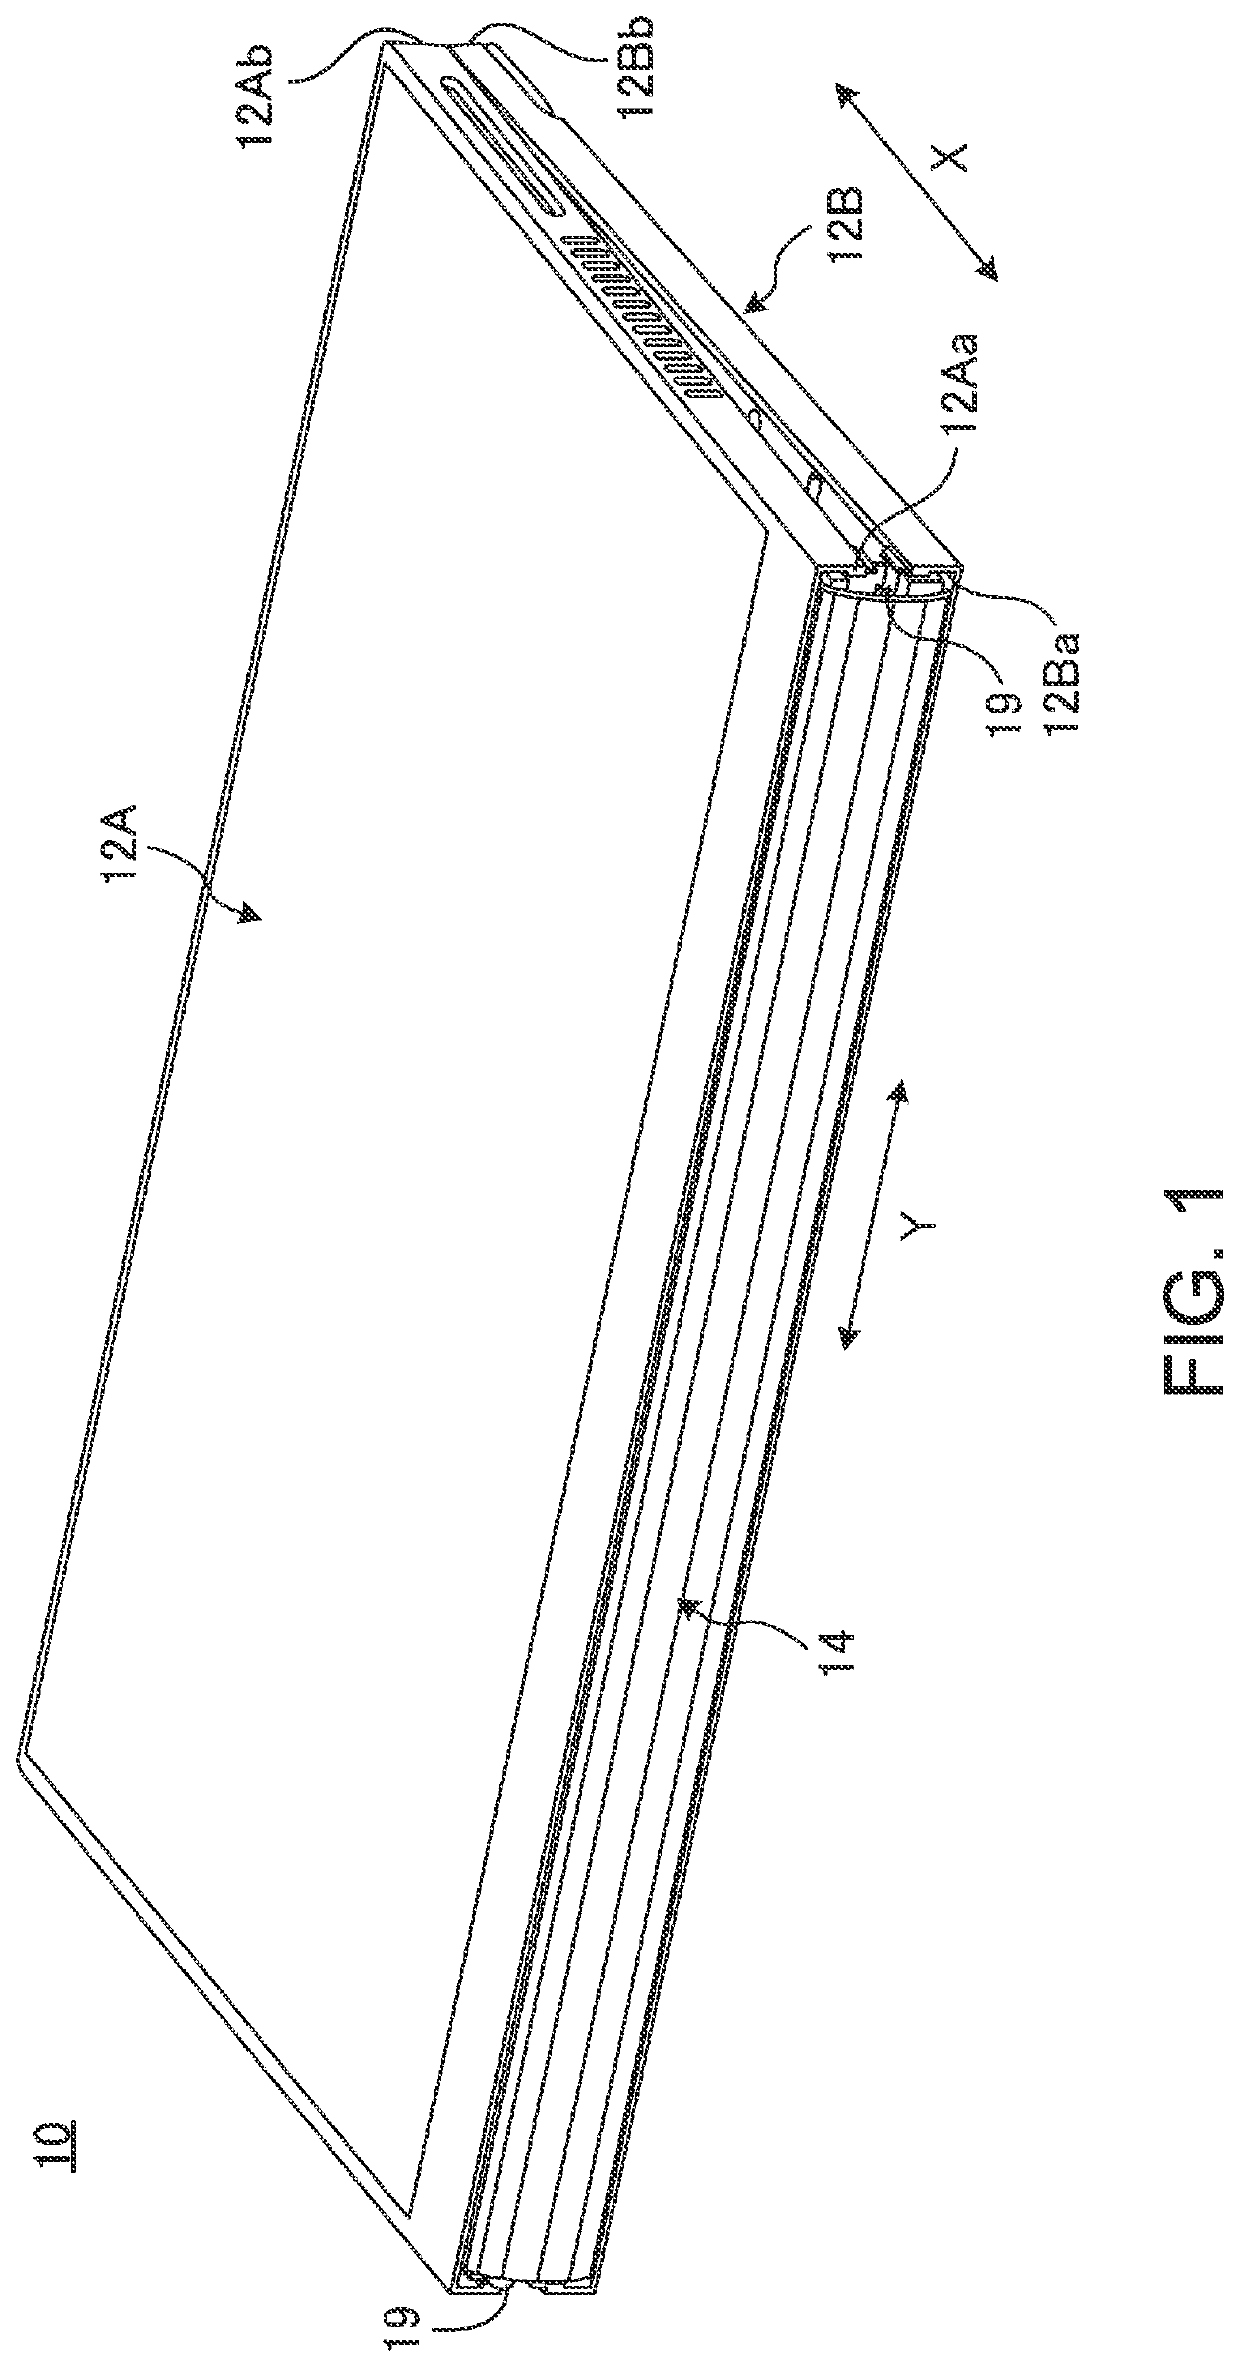 Portable information device